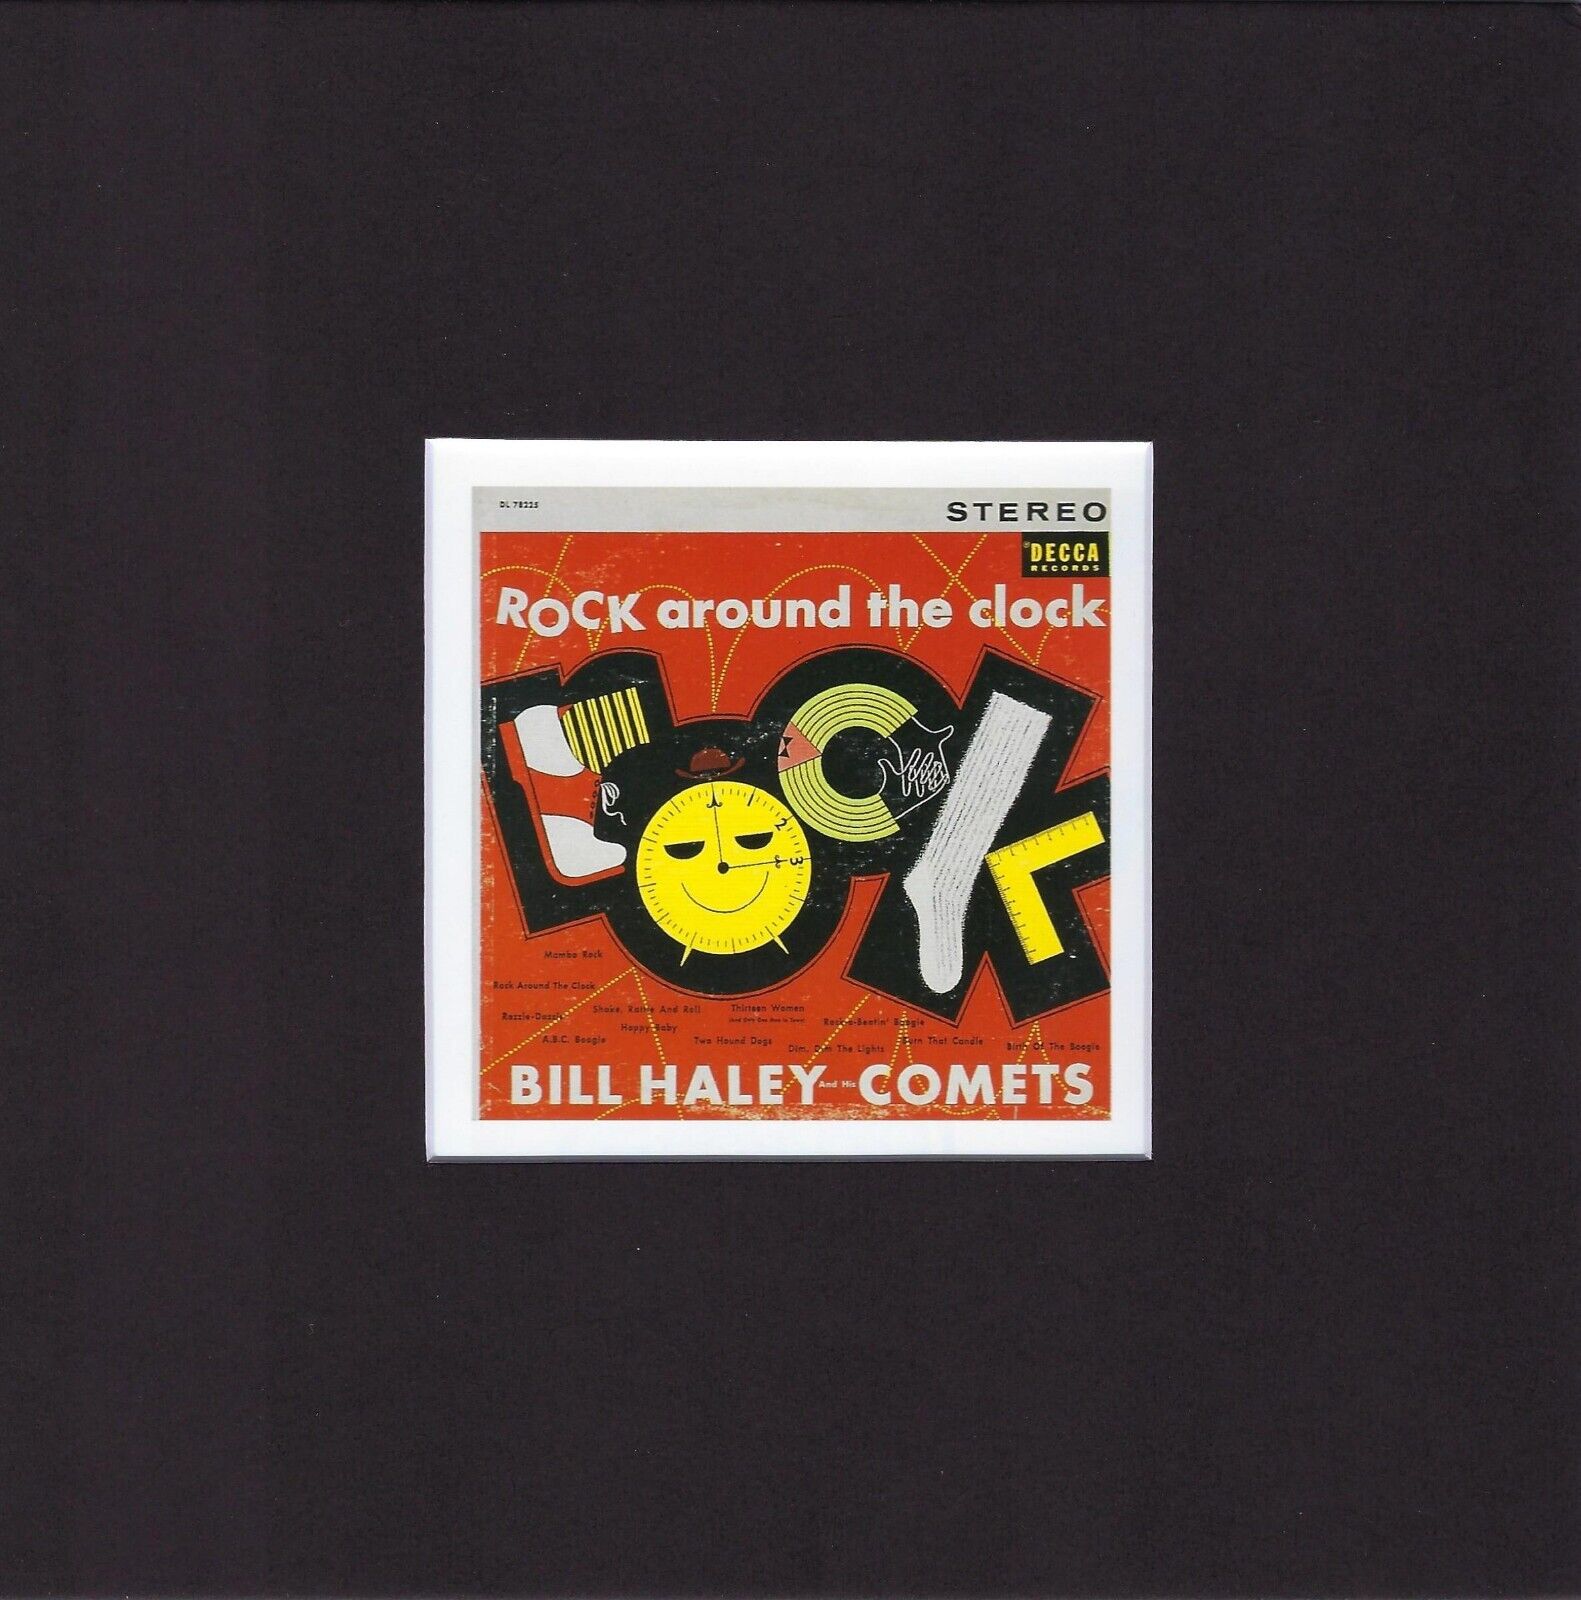 8X8" Matted Print Album Cover Art Picture: Bill Haley & Comets Rock Around Clock Unbranded